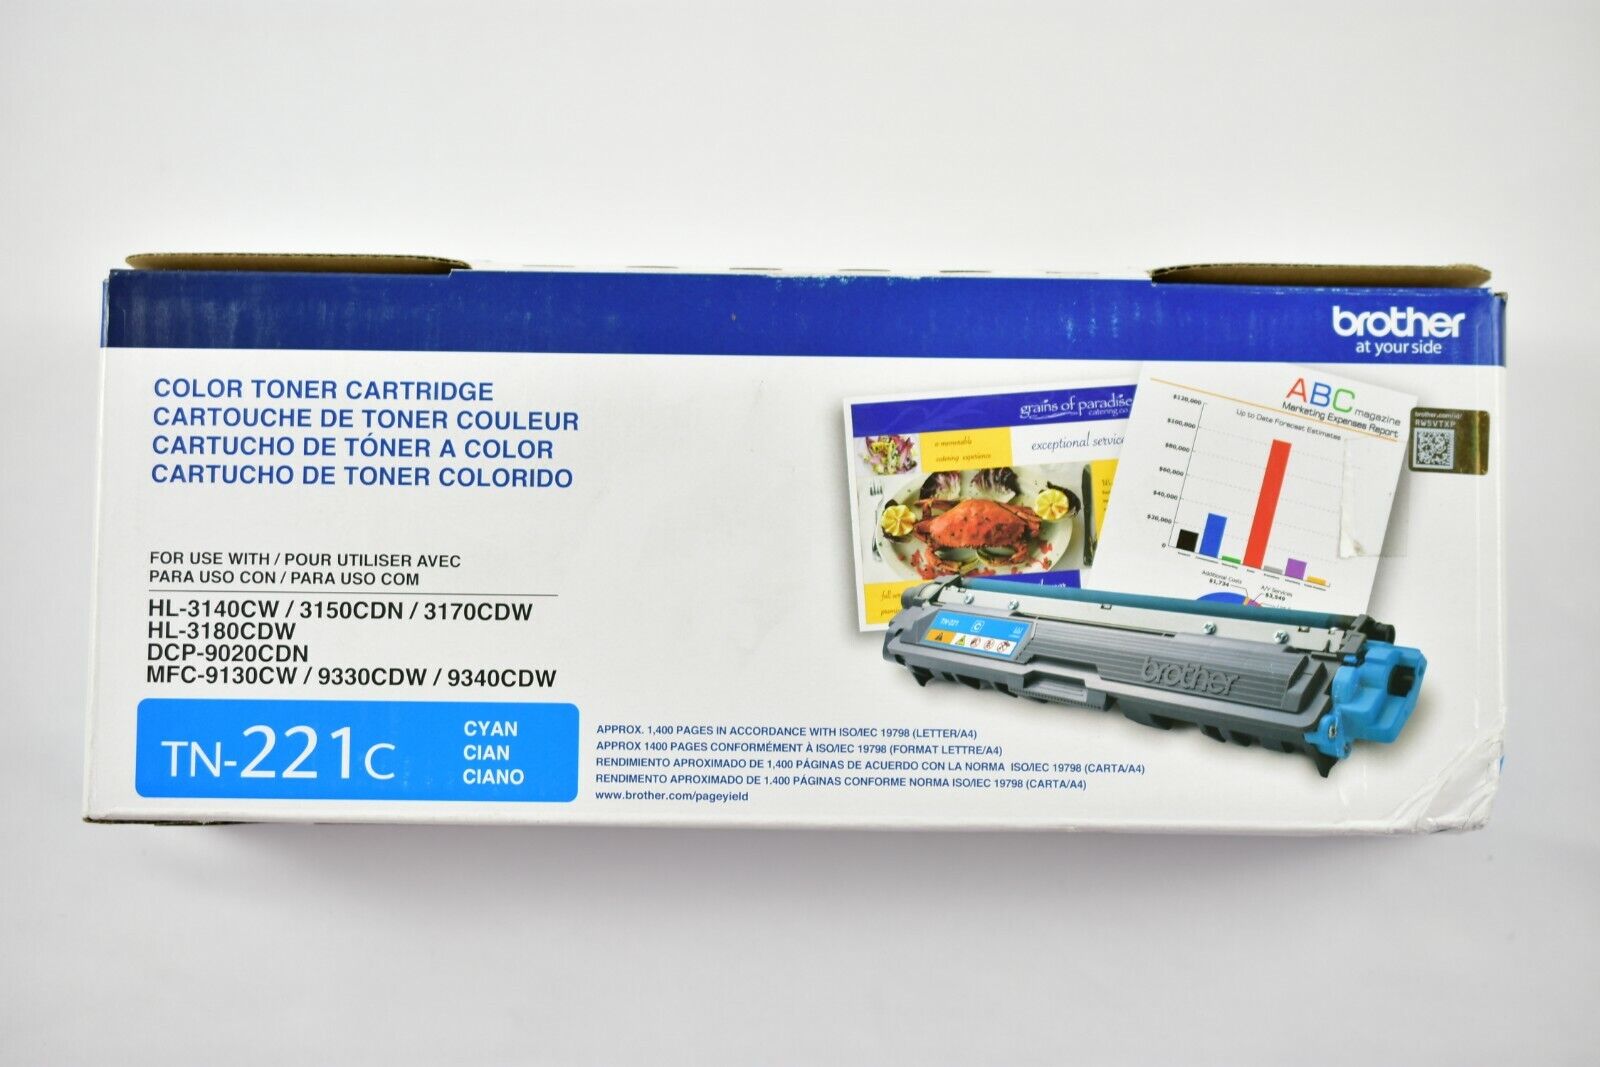 Brother TN221C Cyan Toner Cartridge Genuine for HL3140 DCP-9020 MFC-9130cdw...